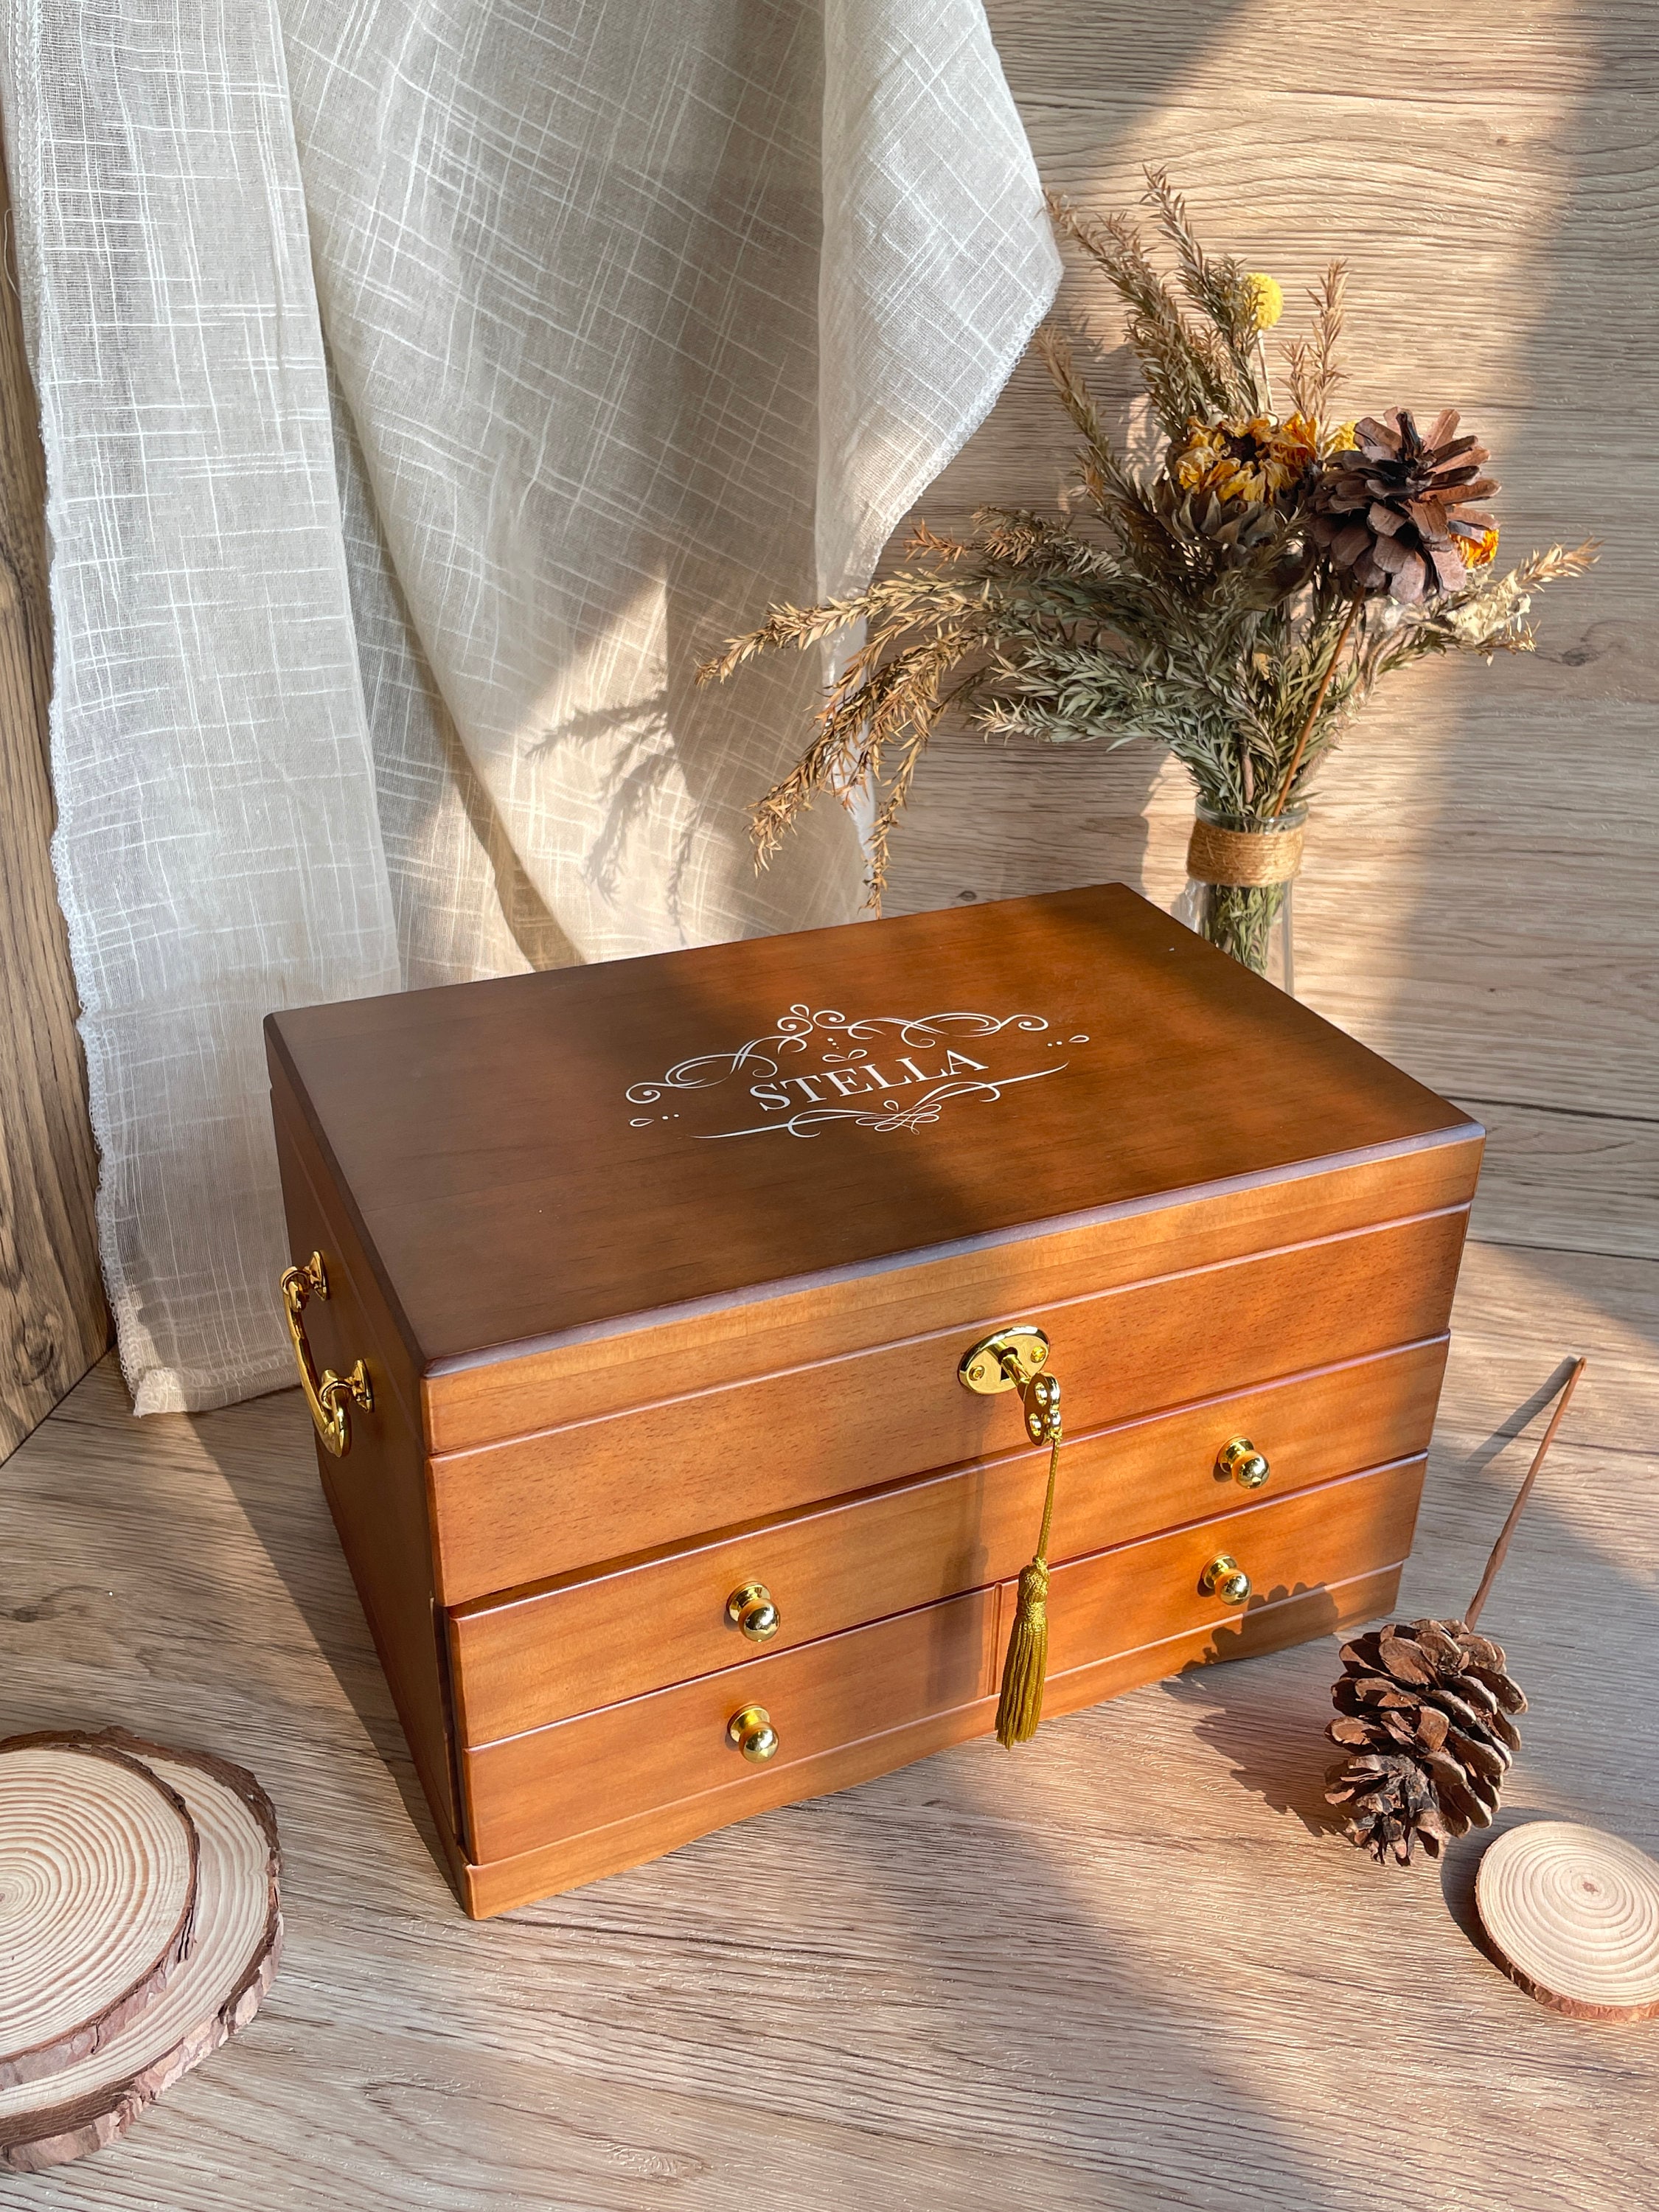 Wooden Hinged Lockable Box Jewellery Storage for Case Crfats Sundries -  AliExpress